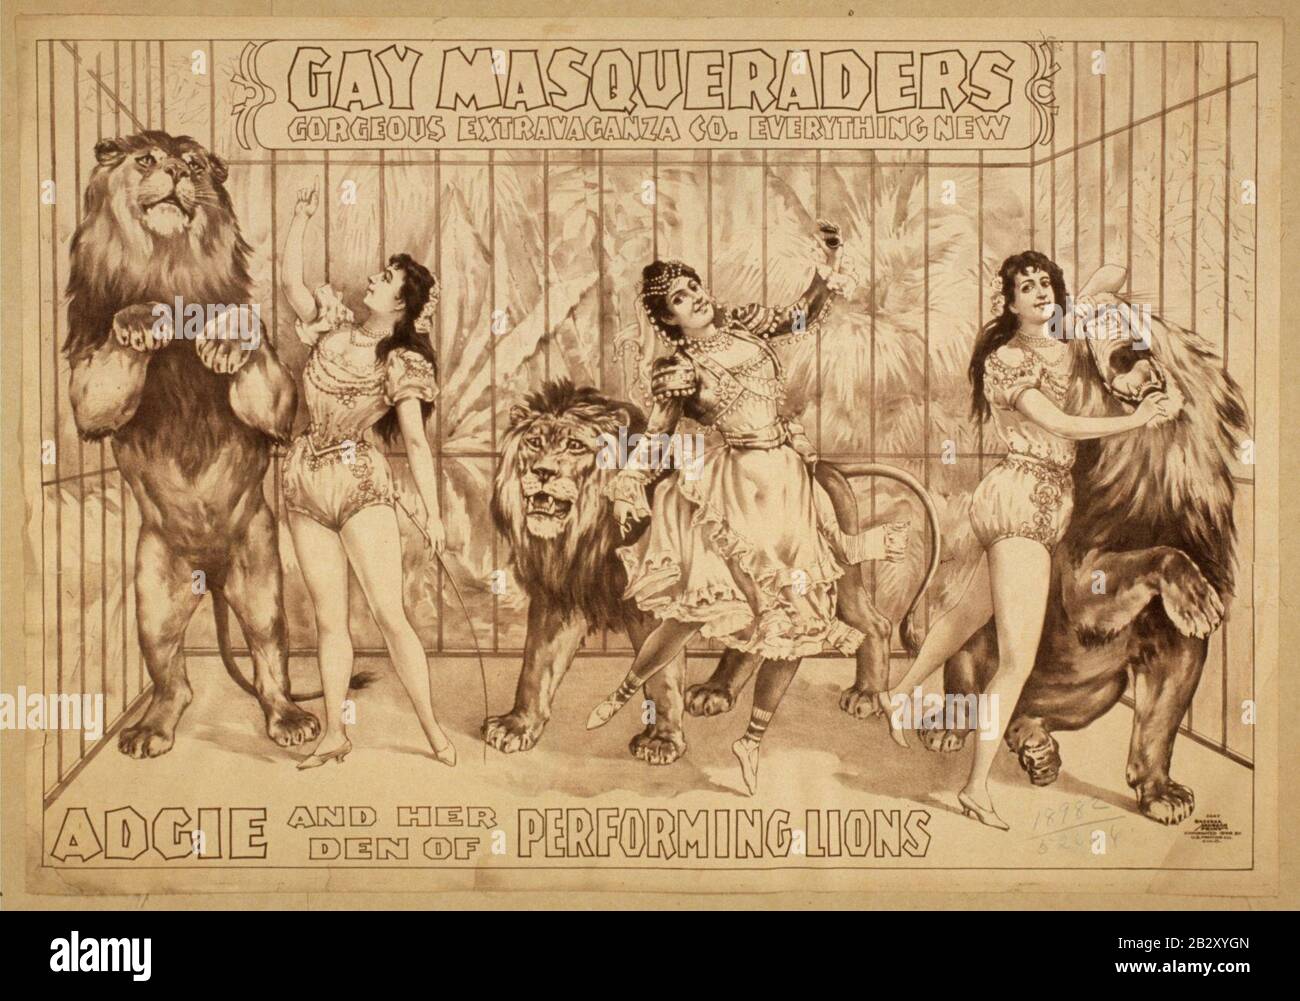 Gay Masqueraders Gorgeous Extravaganza Co. everything new. Stock Photo